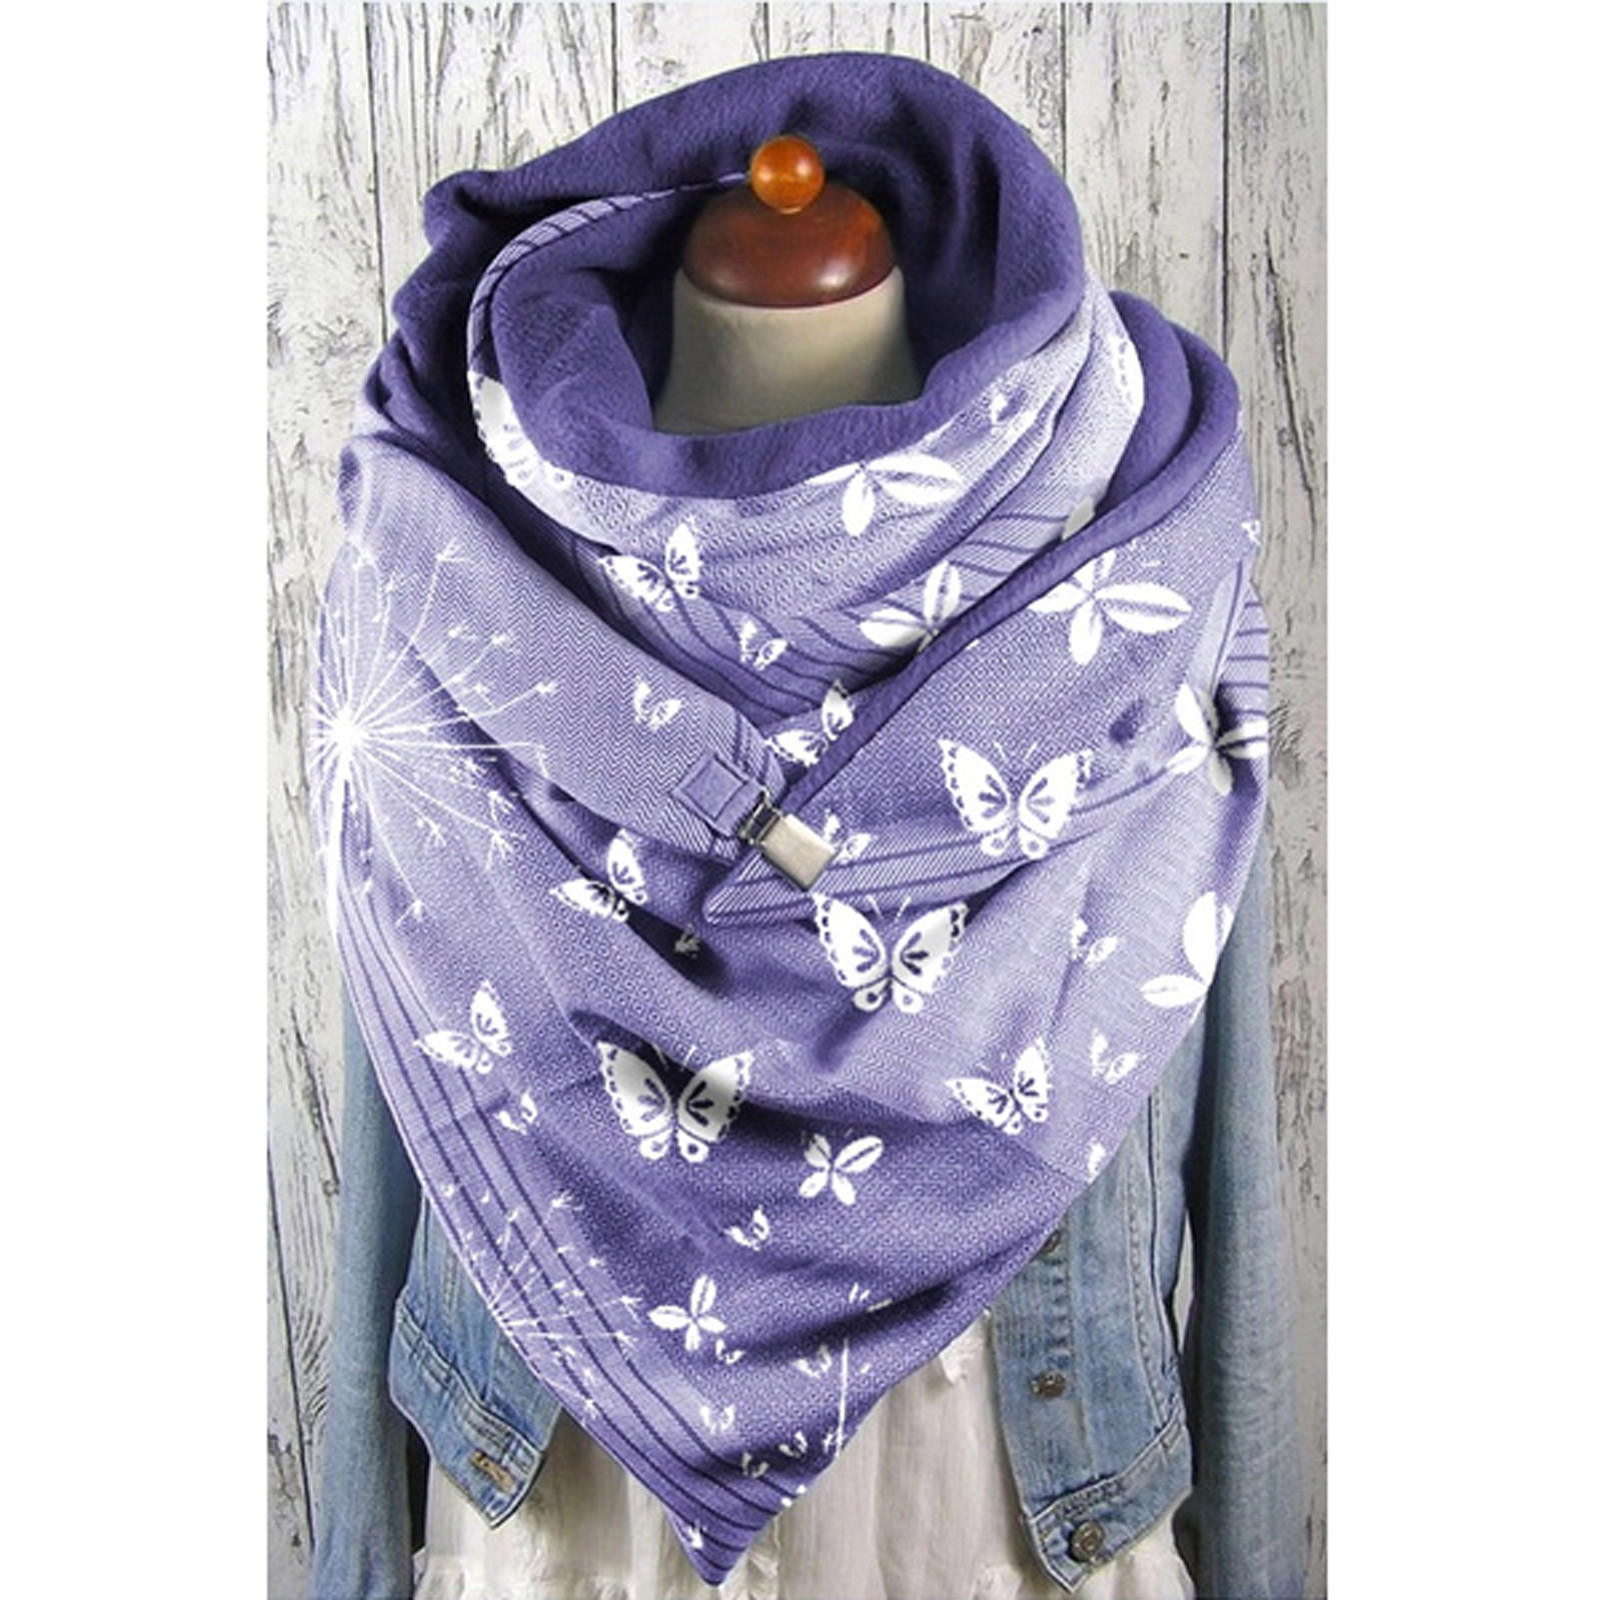 2020 Fashion Winter Women Butterfly Printed Button Scarves Soft Wrap Casual Warm Scarves Shawls Foulard Femme шарф бандана#35